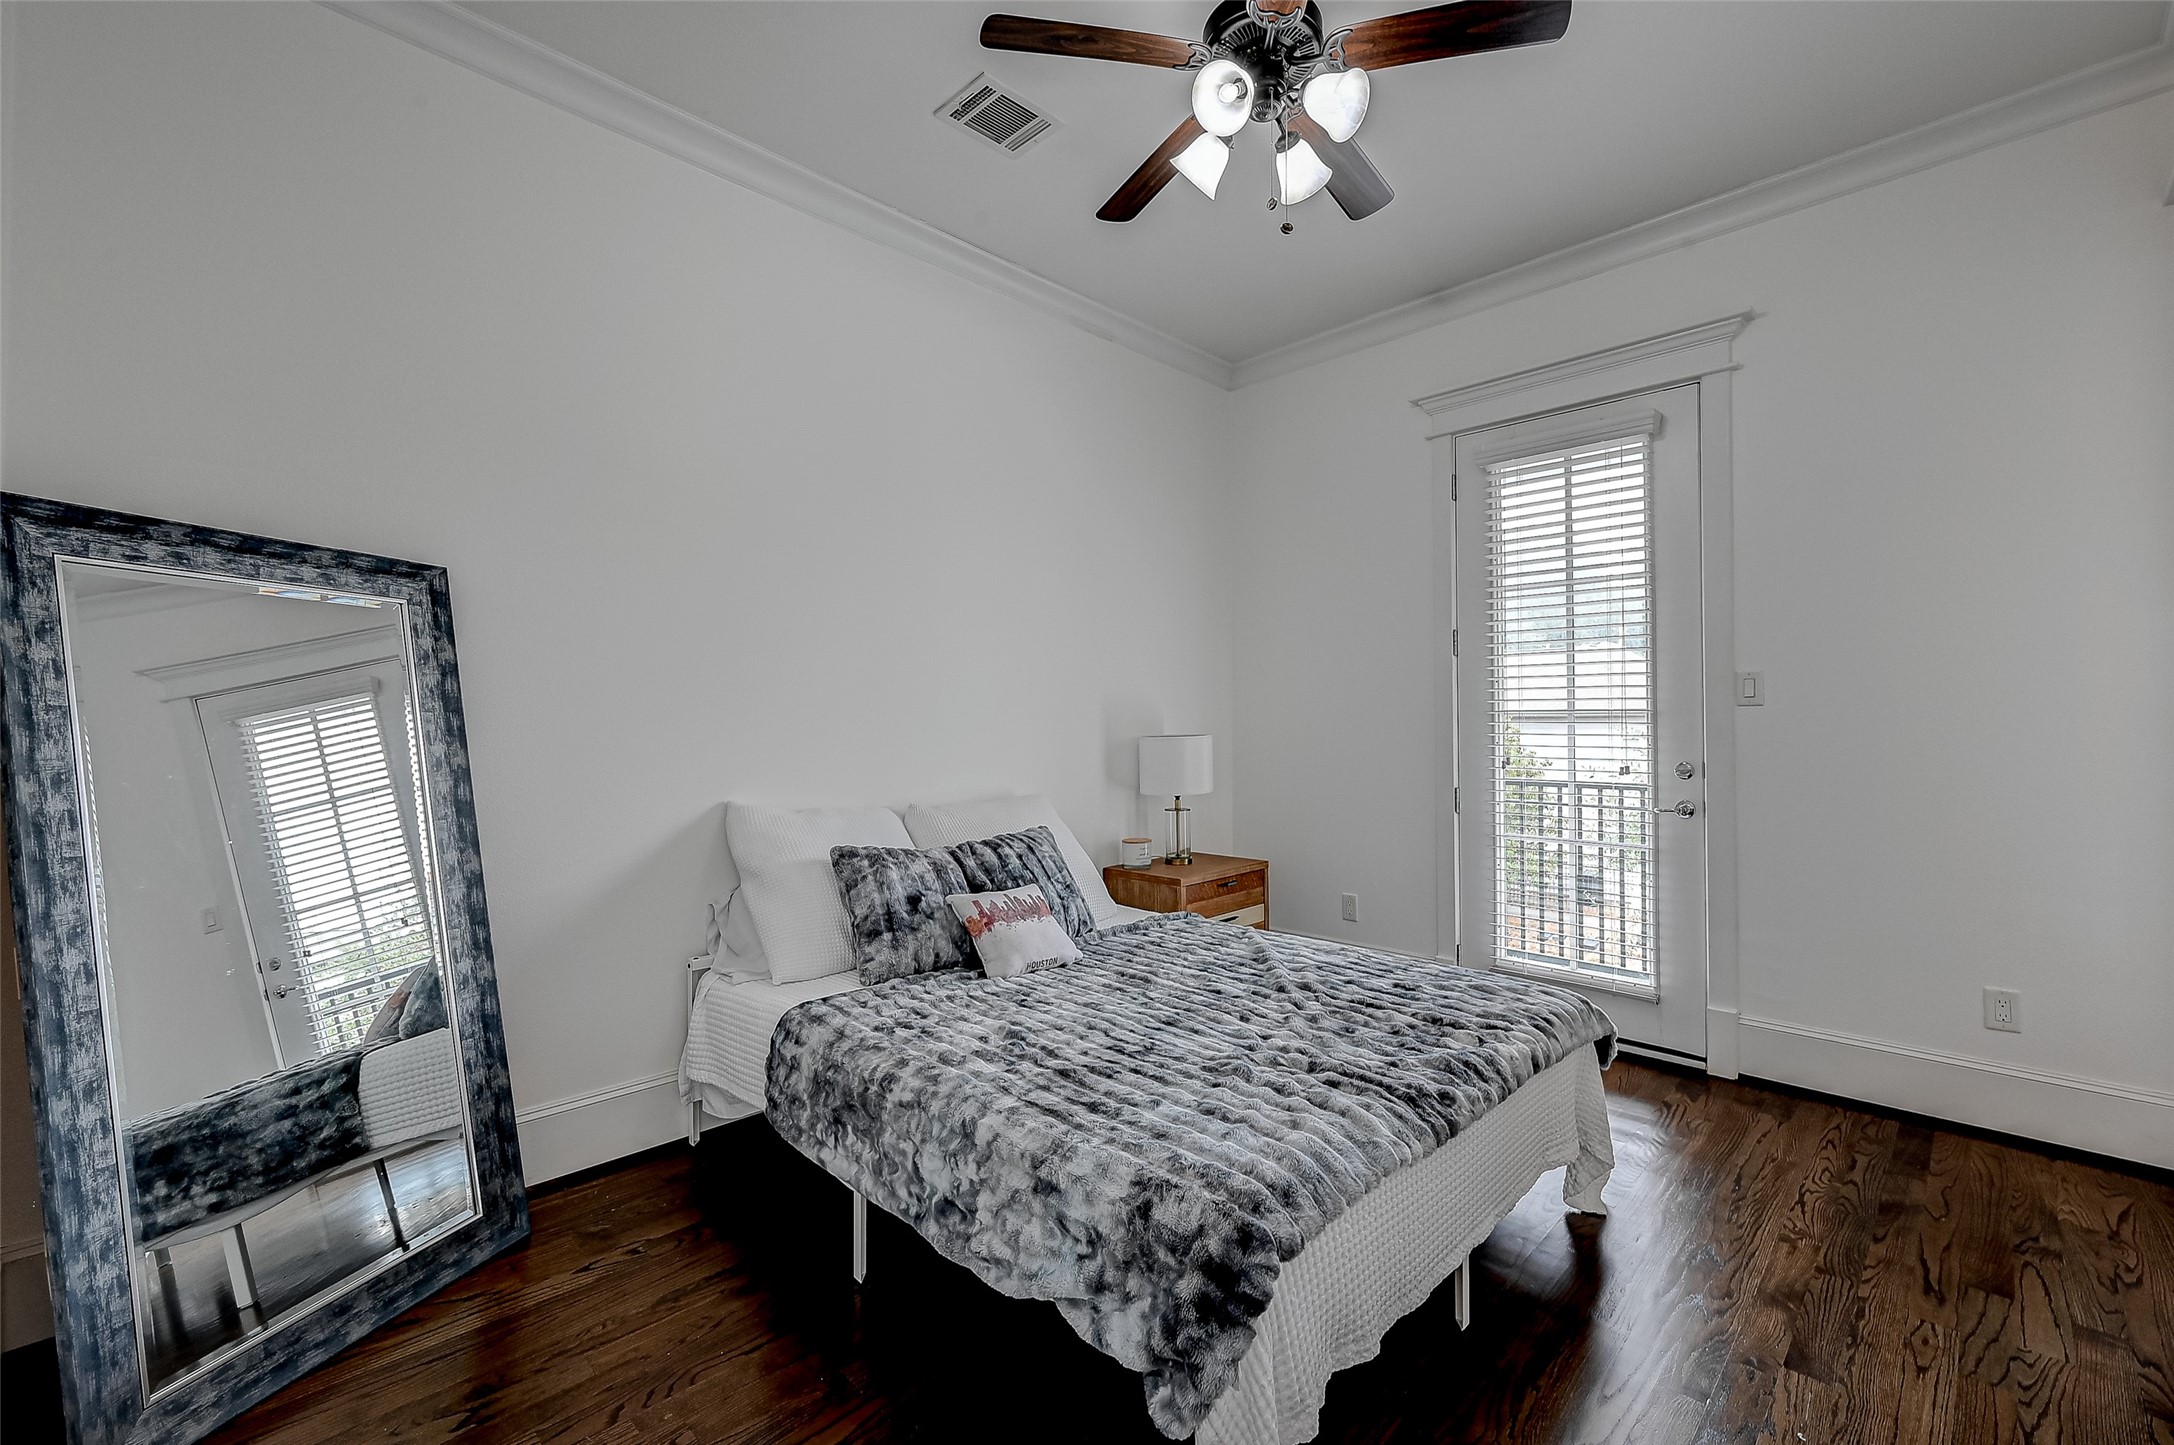 The secondary bedroom, gracing the front of the property, offers a tranquil escape with balcony access, where one can savor the surroundings. Completing the allure, a spacious walk-in closet stands ready to accommodate all your storage needs.